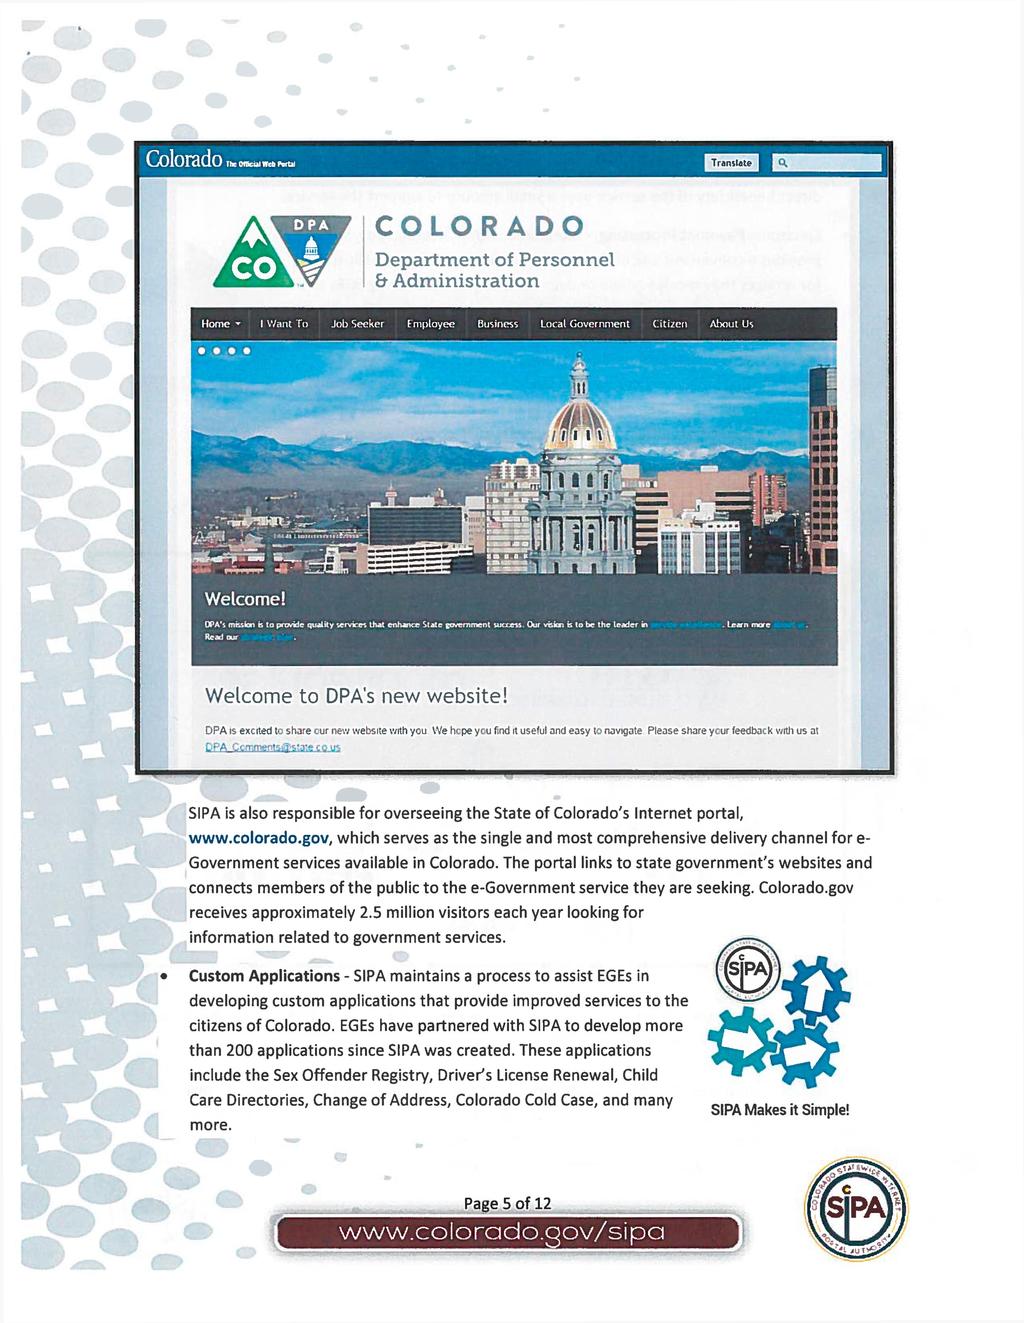 Colorado COLORADO Department of Personnel Welcome to DPA's new website! DPA is excited to share our new website with you. We hope you find it useful and easy to navigate.